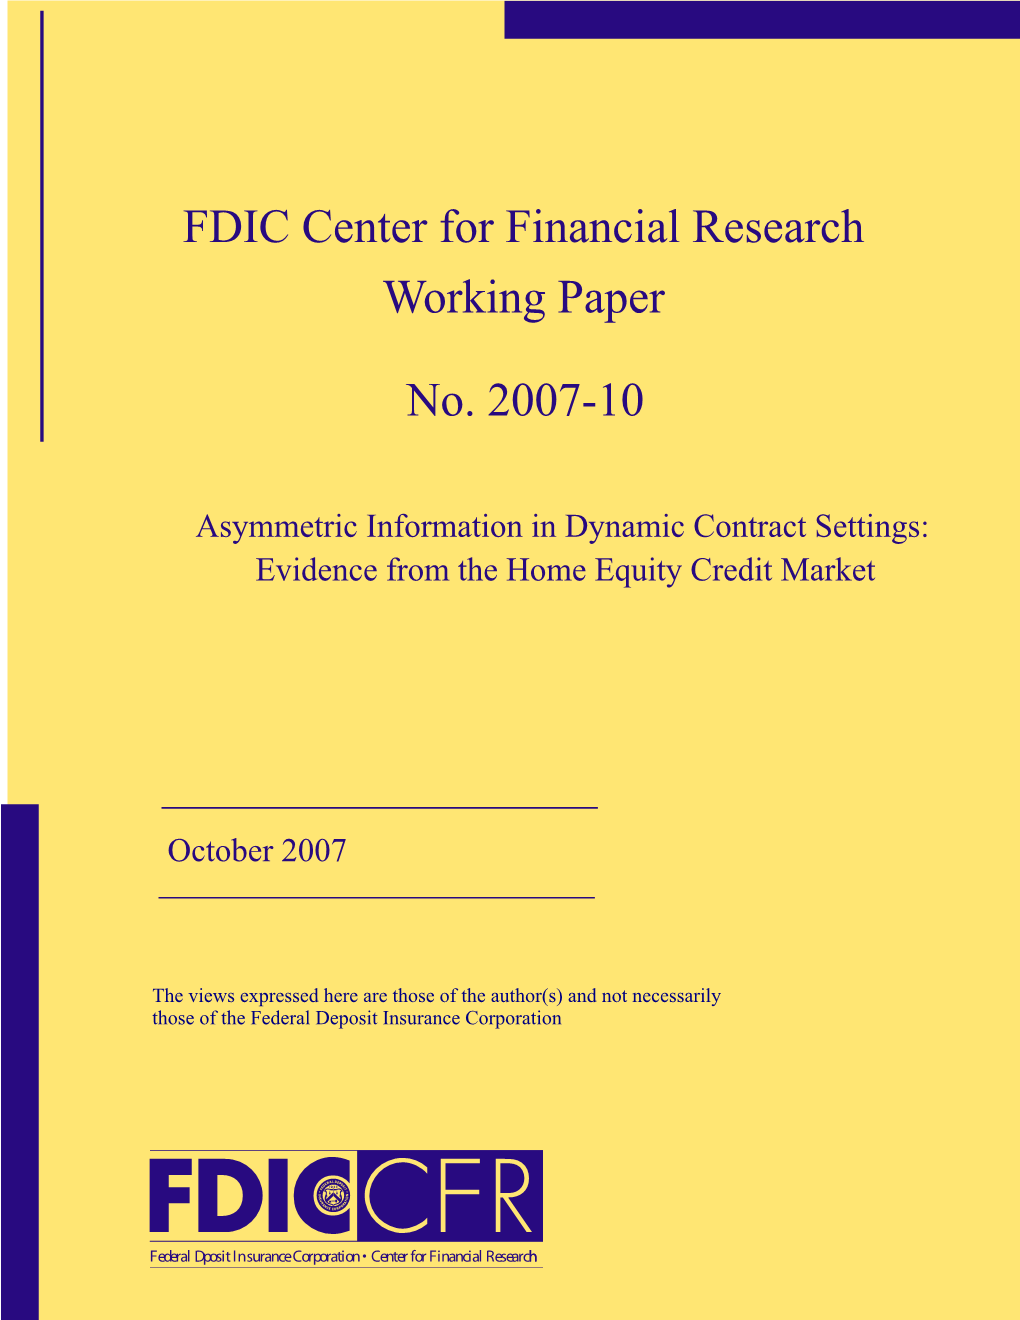 FDIC Center for Financial Research Working Paper No. 2007-10